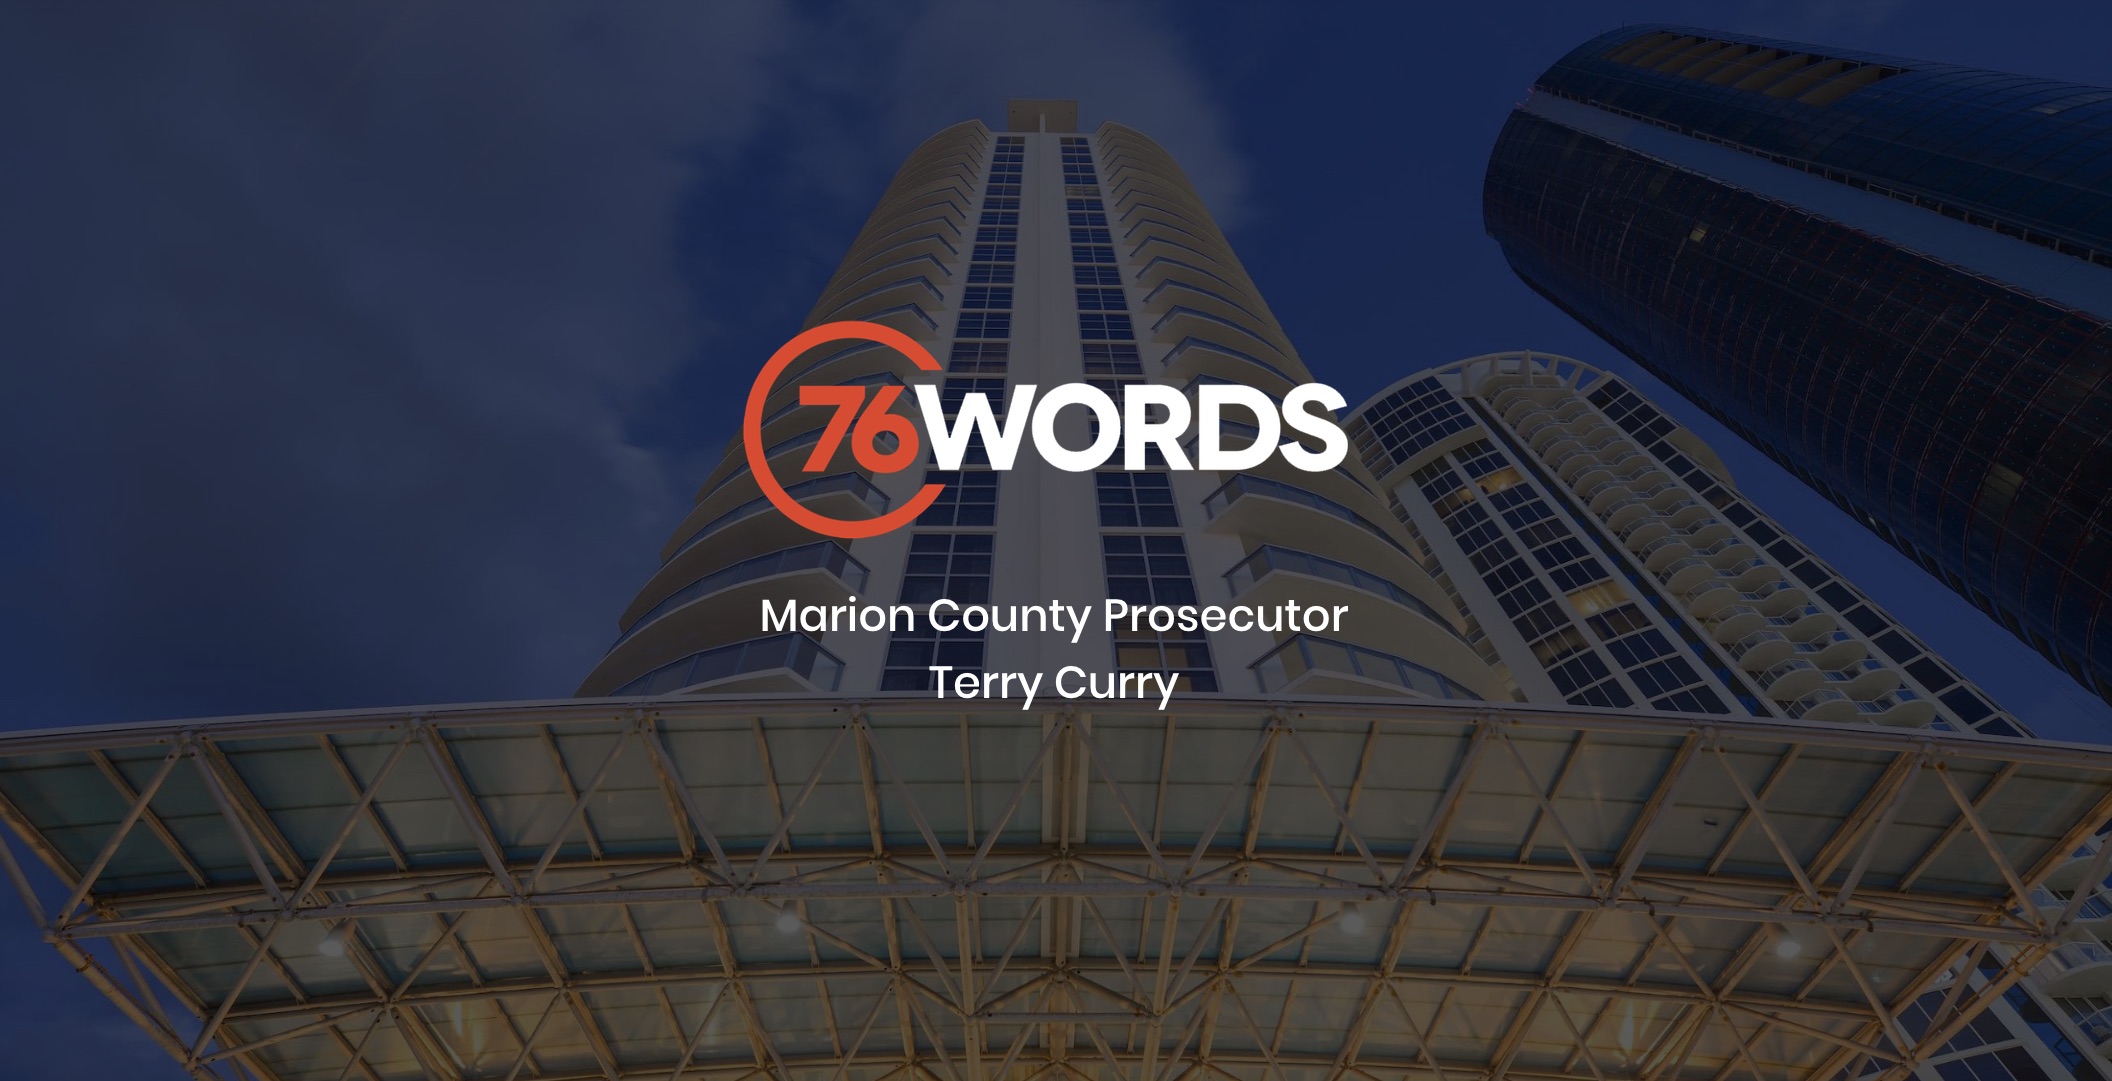 White and orange 76 words Marion County Prosecutor Terry Curry logo with dimmed background view looking up at a tall round shaped building